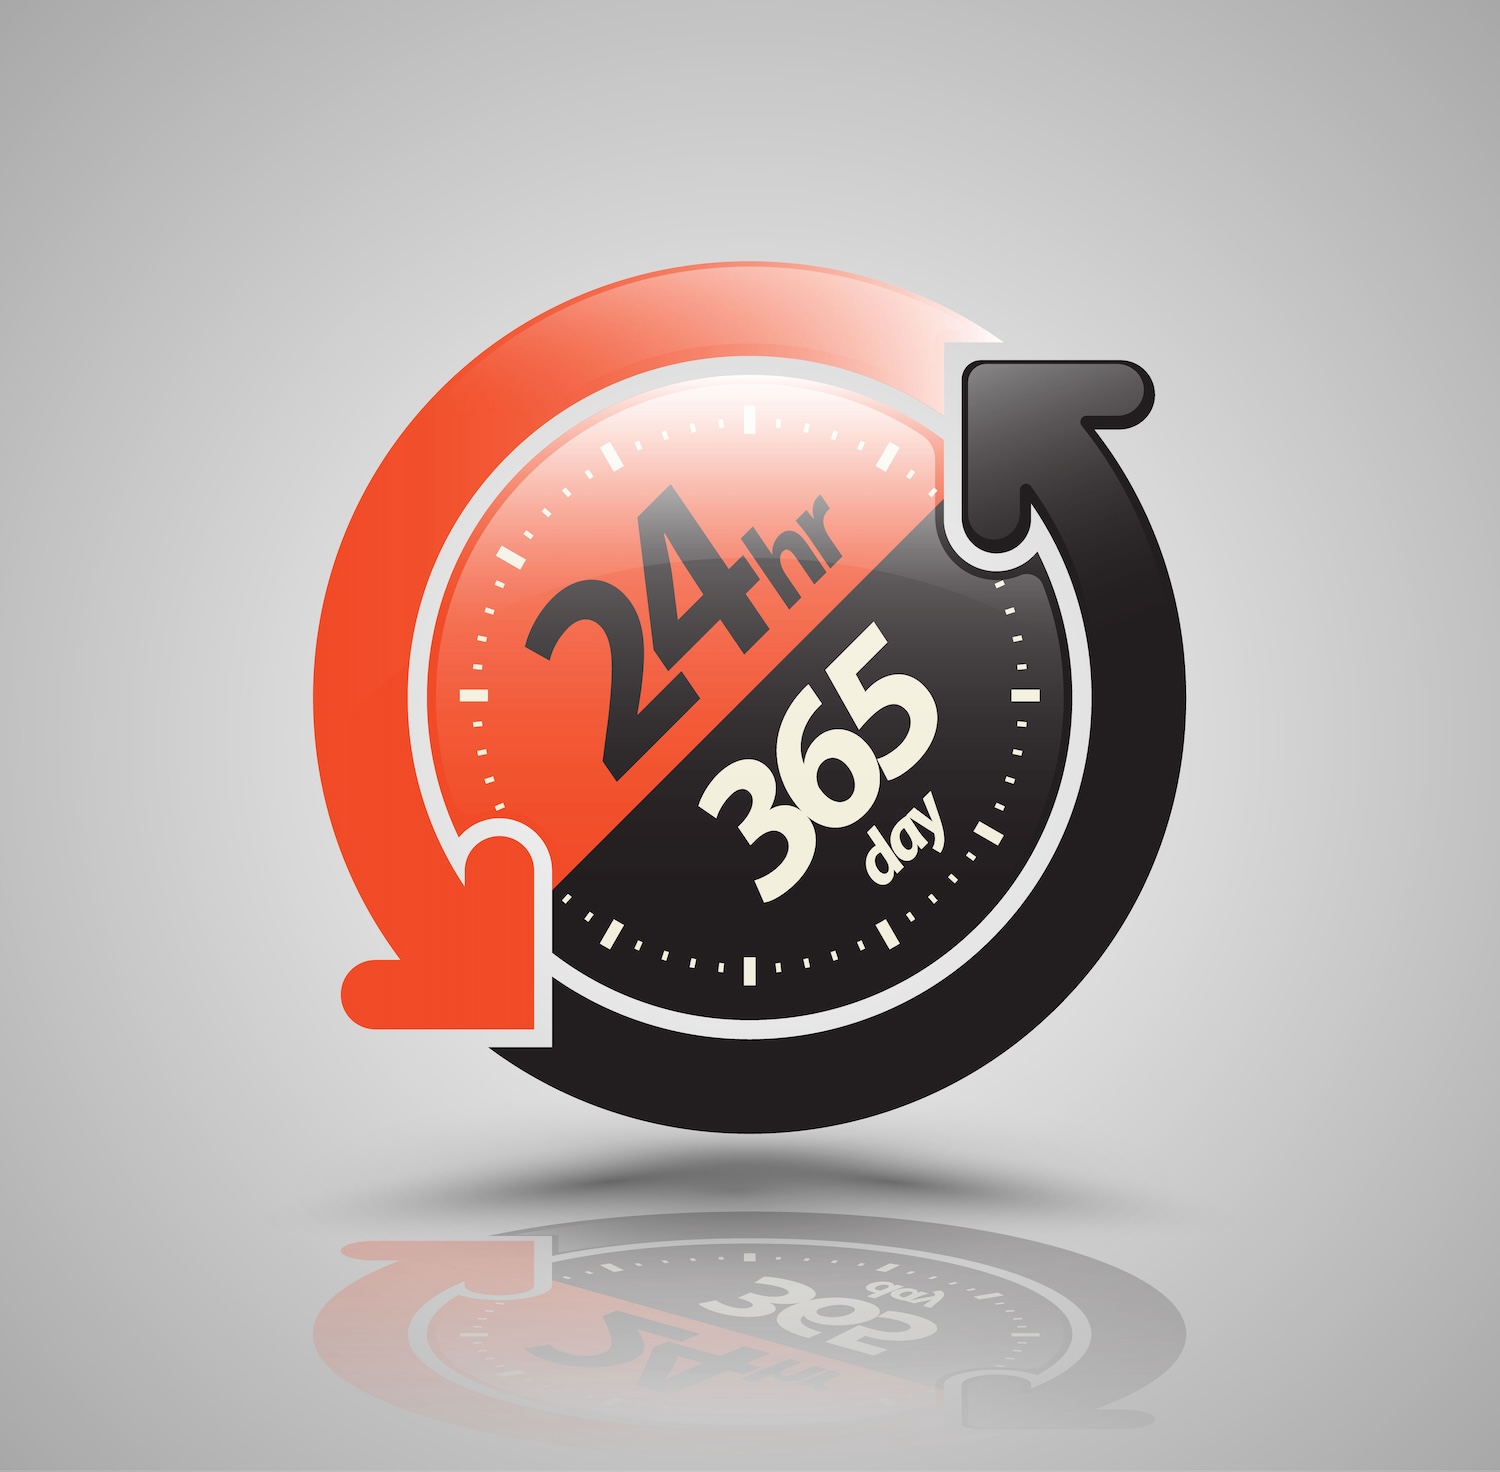 24hr 365 day with two circle arrow icon. vector illustration.